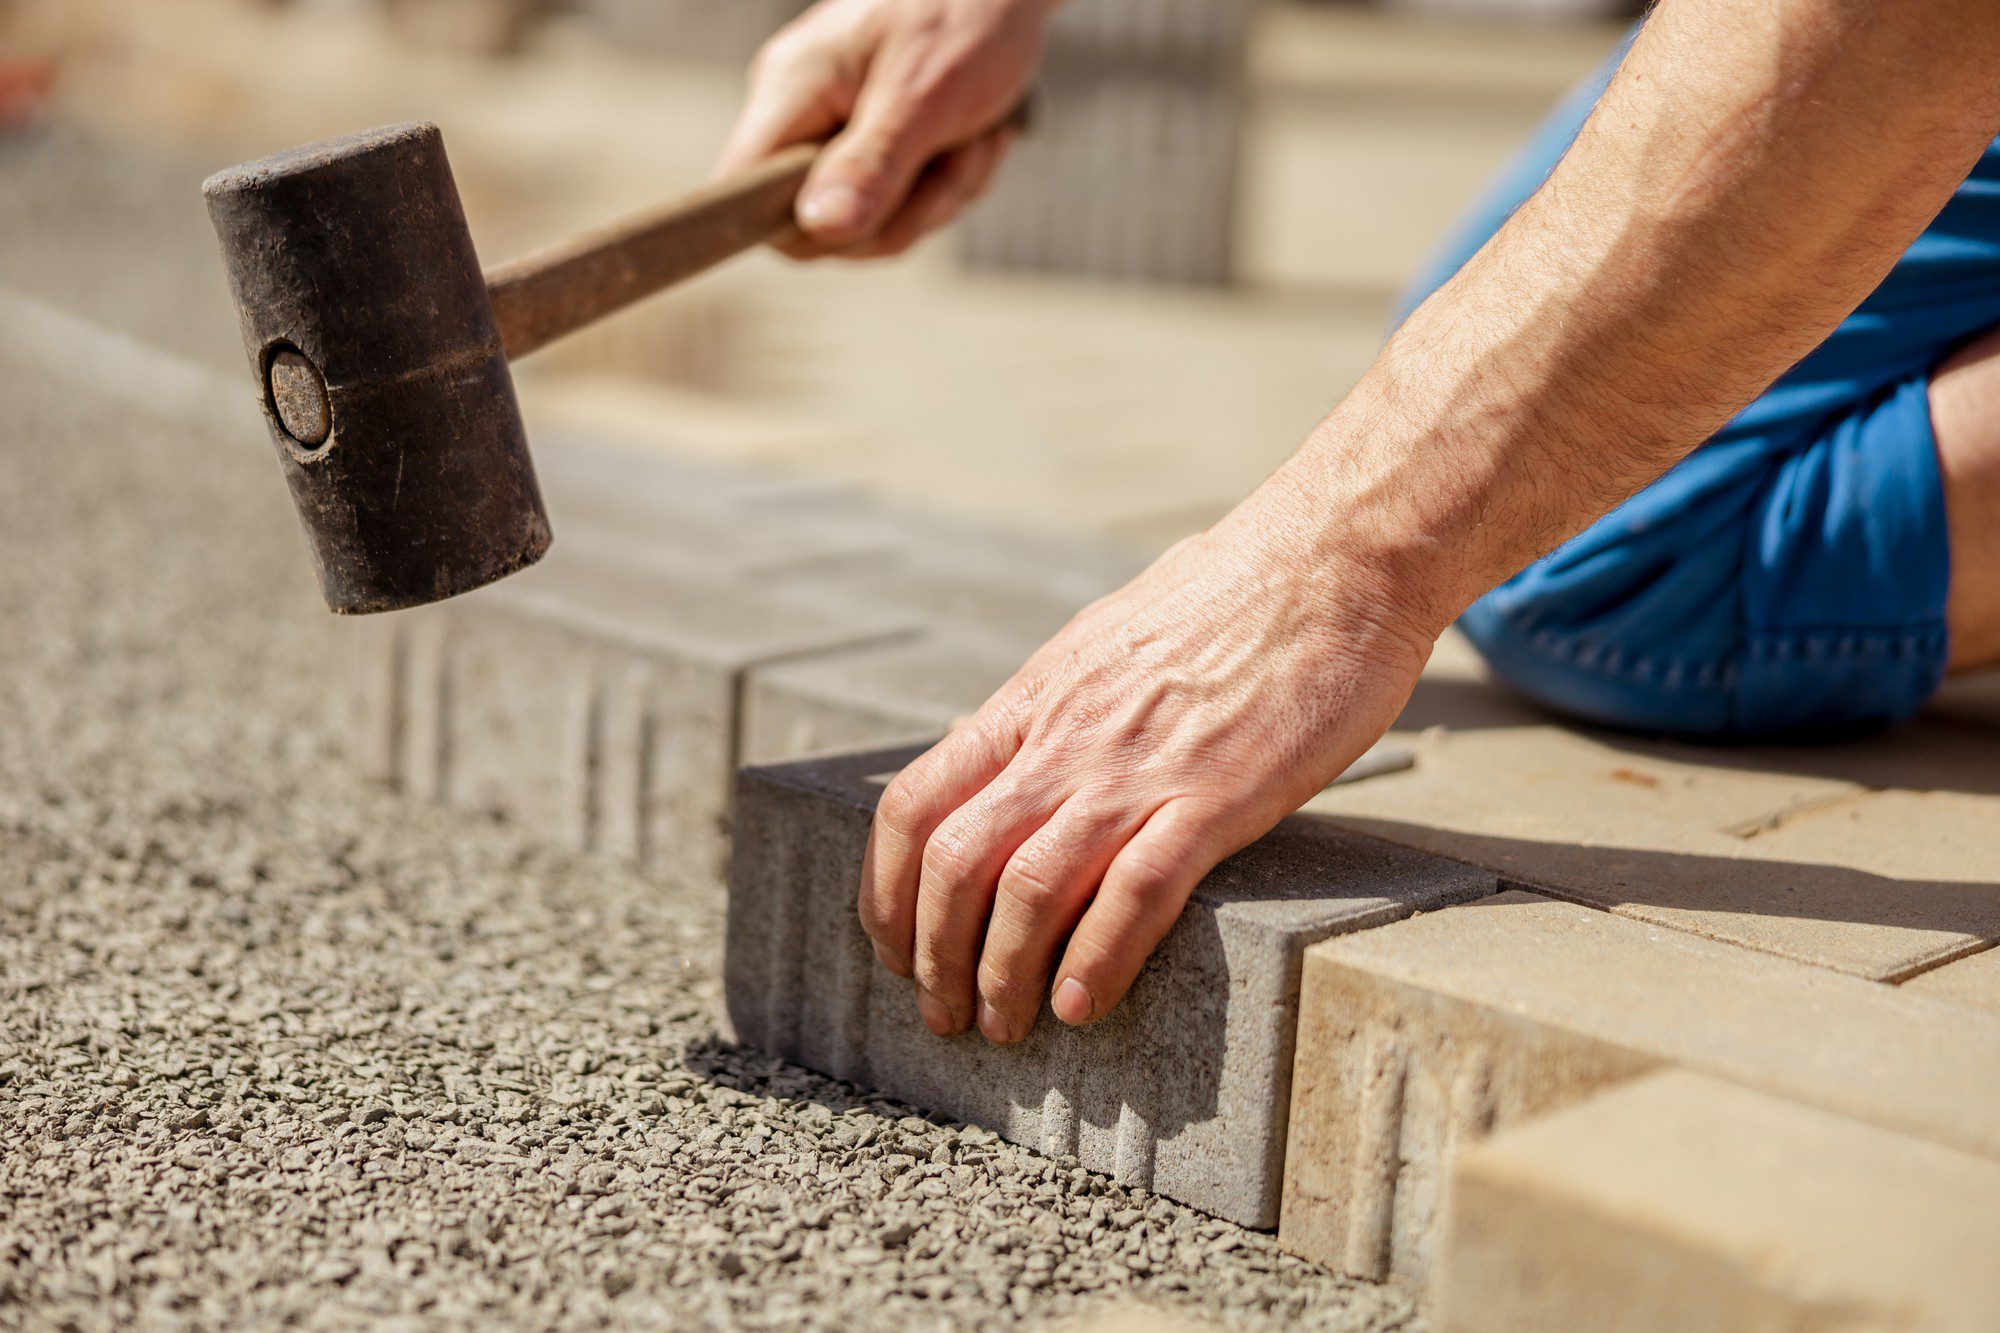 This image shows a person engaged in some kind of masonry or paving work. The individual is holding a rubber mallet and is in the process of positioning or securing a block of material, which appears to be a patio paver or a similar type of landscaping stone, onto a bed of fine gravel, typically used for level and stabilize the stones. The focus is on the person's hands: one hand is positioning the stone, and the other is holding the mallet. The person is wearing casual clothing, possibly indicating a home improvement setting rather than a professional construction site. It's a sunny day, indicating outdoor work.